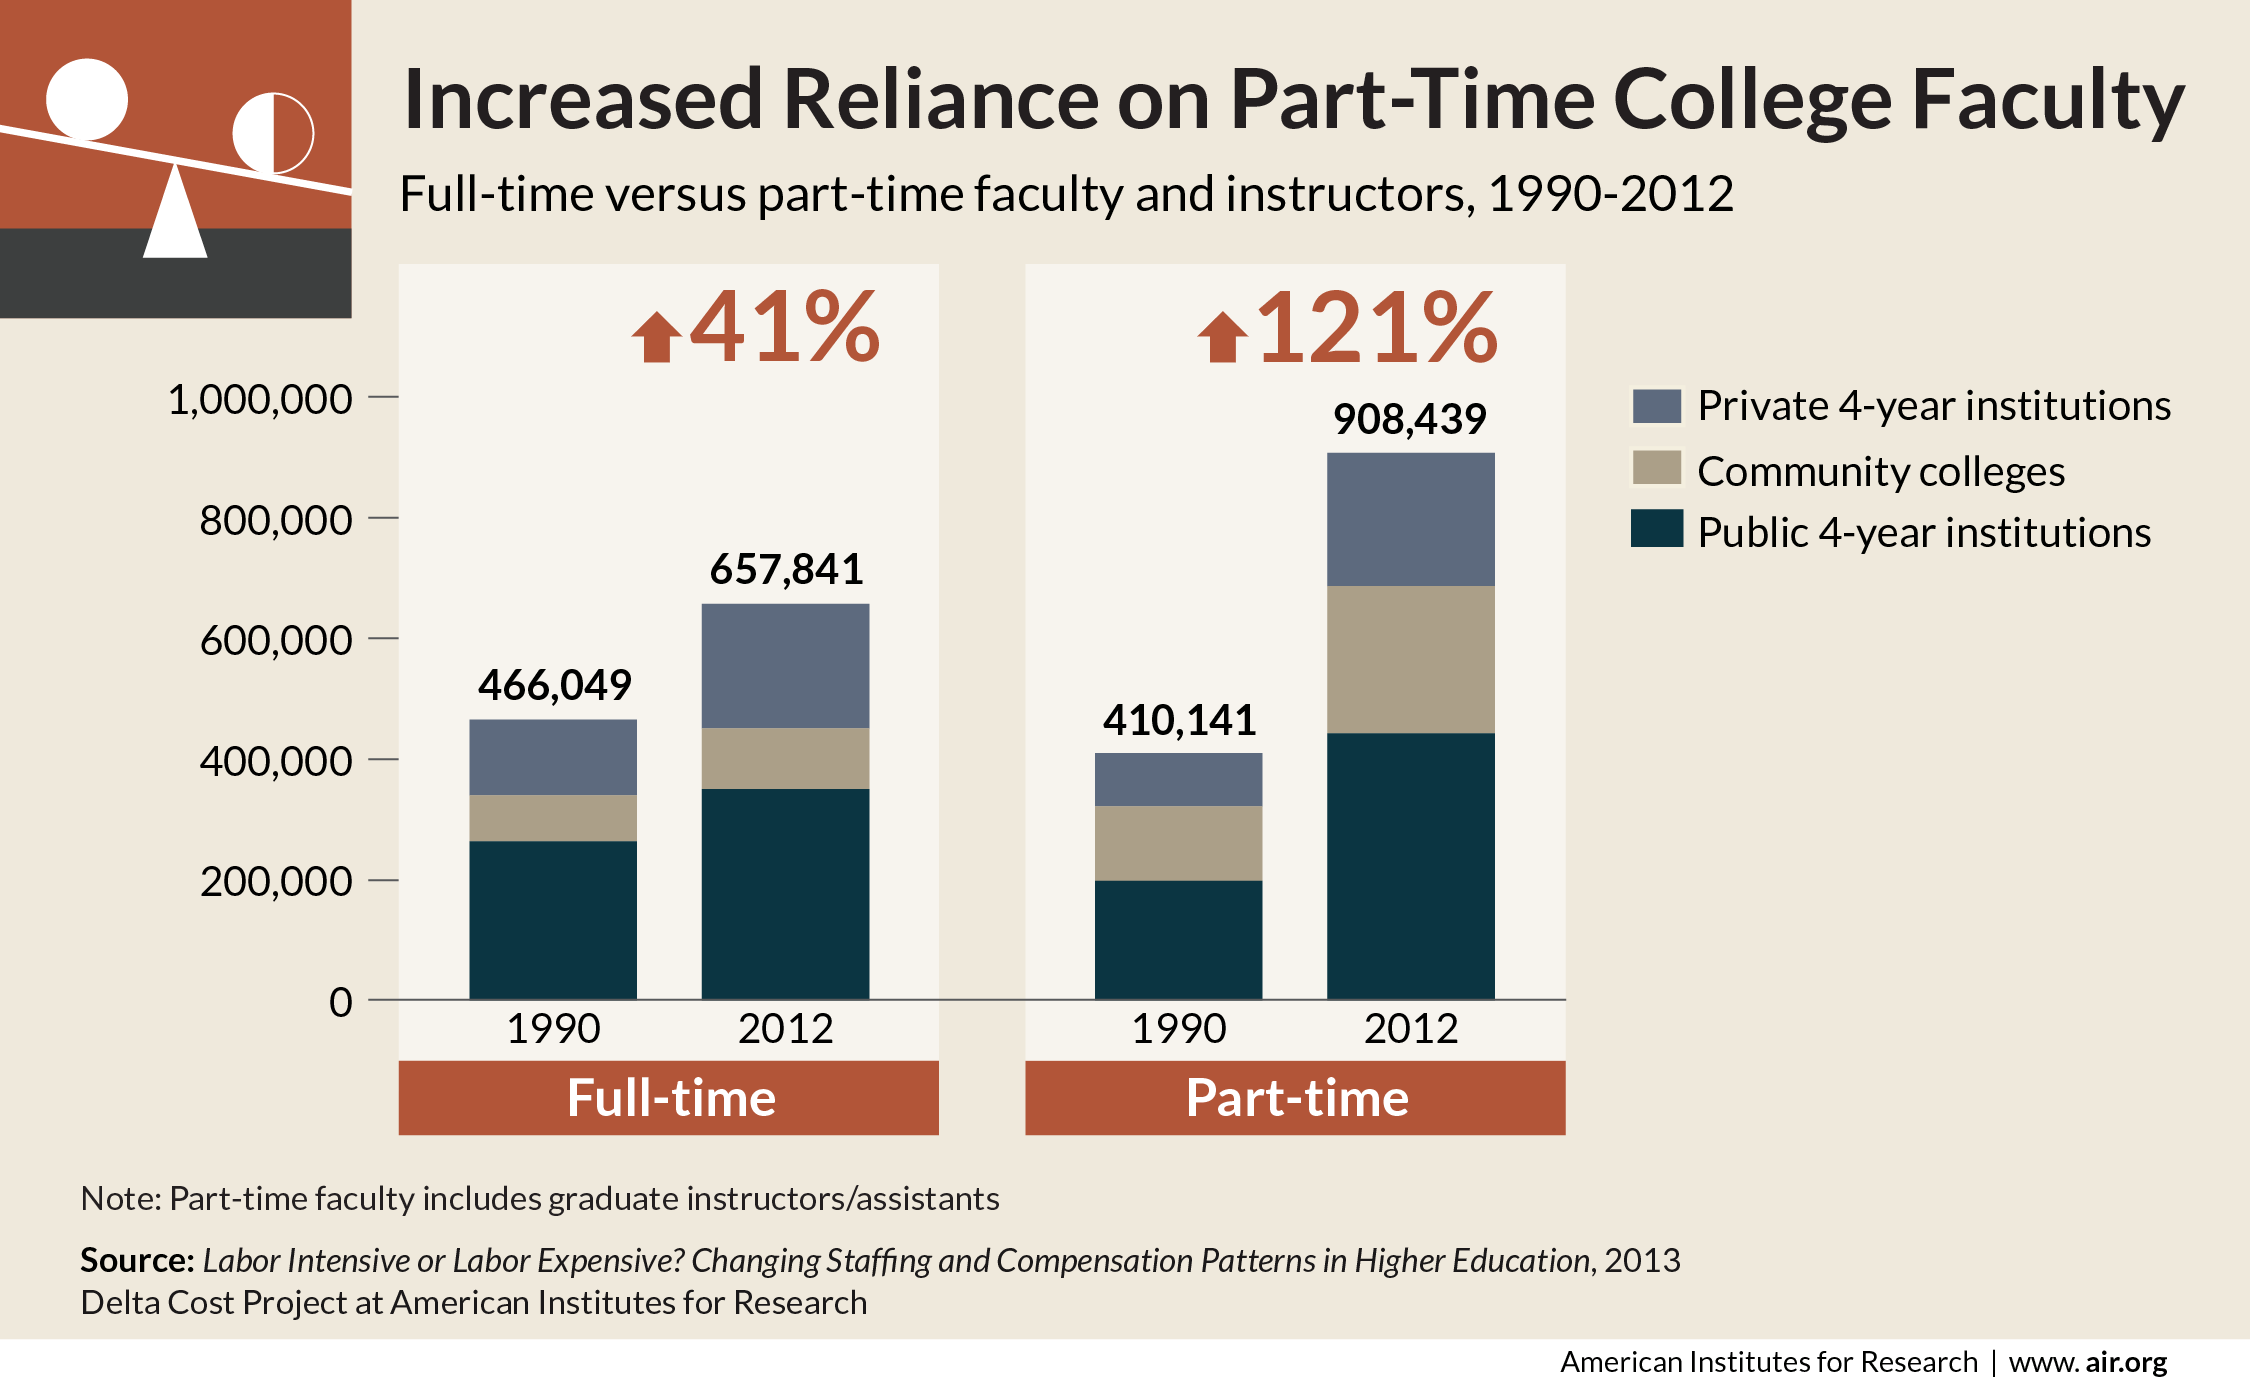 Delta Cost Report: Increased reliance on part-time college faculty